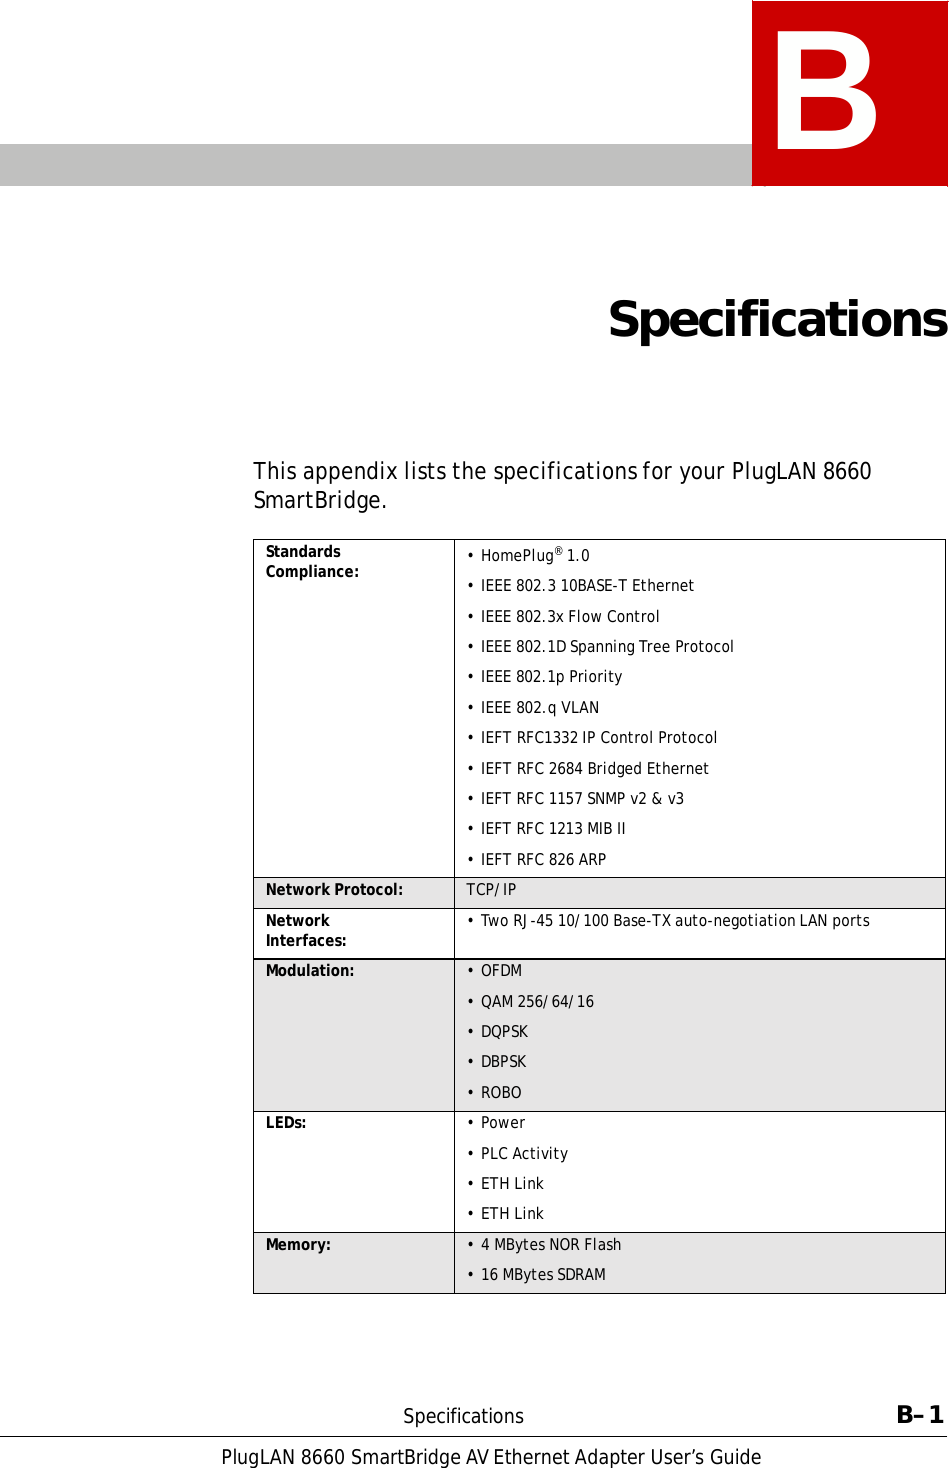 PlugLAN 8660 SmartBridge AV Ethernet Adapter User’s Guide  B     Specifications       This appendix lists the specifications for your PlugLAN 8660 SmartBridge.  Standards Compliance: • HomePlug® 1.0  • IEEE 802.3 10BASE-T Ethernet  • IEEE 802.3x Flow Control  • IEEE 802.1D Spanning Tree Protocol  • IEEE 802.1p Priority  • IEEE 802.q VLAN  • IEFT RFC1332 IP Control Protocol  • IEFT RFC 2684 Bridged Ethernet  • IEFT RFC 1157 SNMP v2 &amp; v3  • IEFT RFC 1213 MIB II  • IEFT RFC 826 ARP Network Protocol: TCP/IPNetwork Interfaces: • Two RJ-45 10/100 Base-TX auto-negotiation LAN portsModulation: • OFDM  • QAM 256/64/16  • DQPSK  • DBPSK  • ROBO LEDs: • Power  • PLC Activity  • ETH Link  • ETH Link Memory: • 4 MBytes NOR Flash  • 16 MBytes SDRAM      Specifications  B–1 